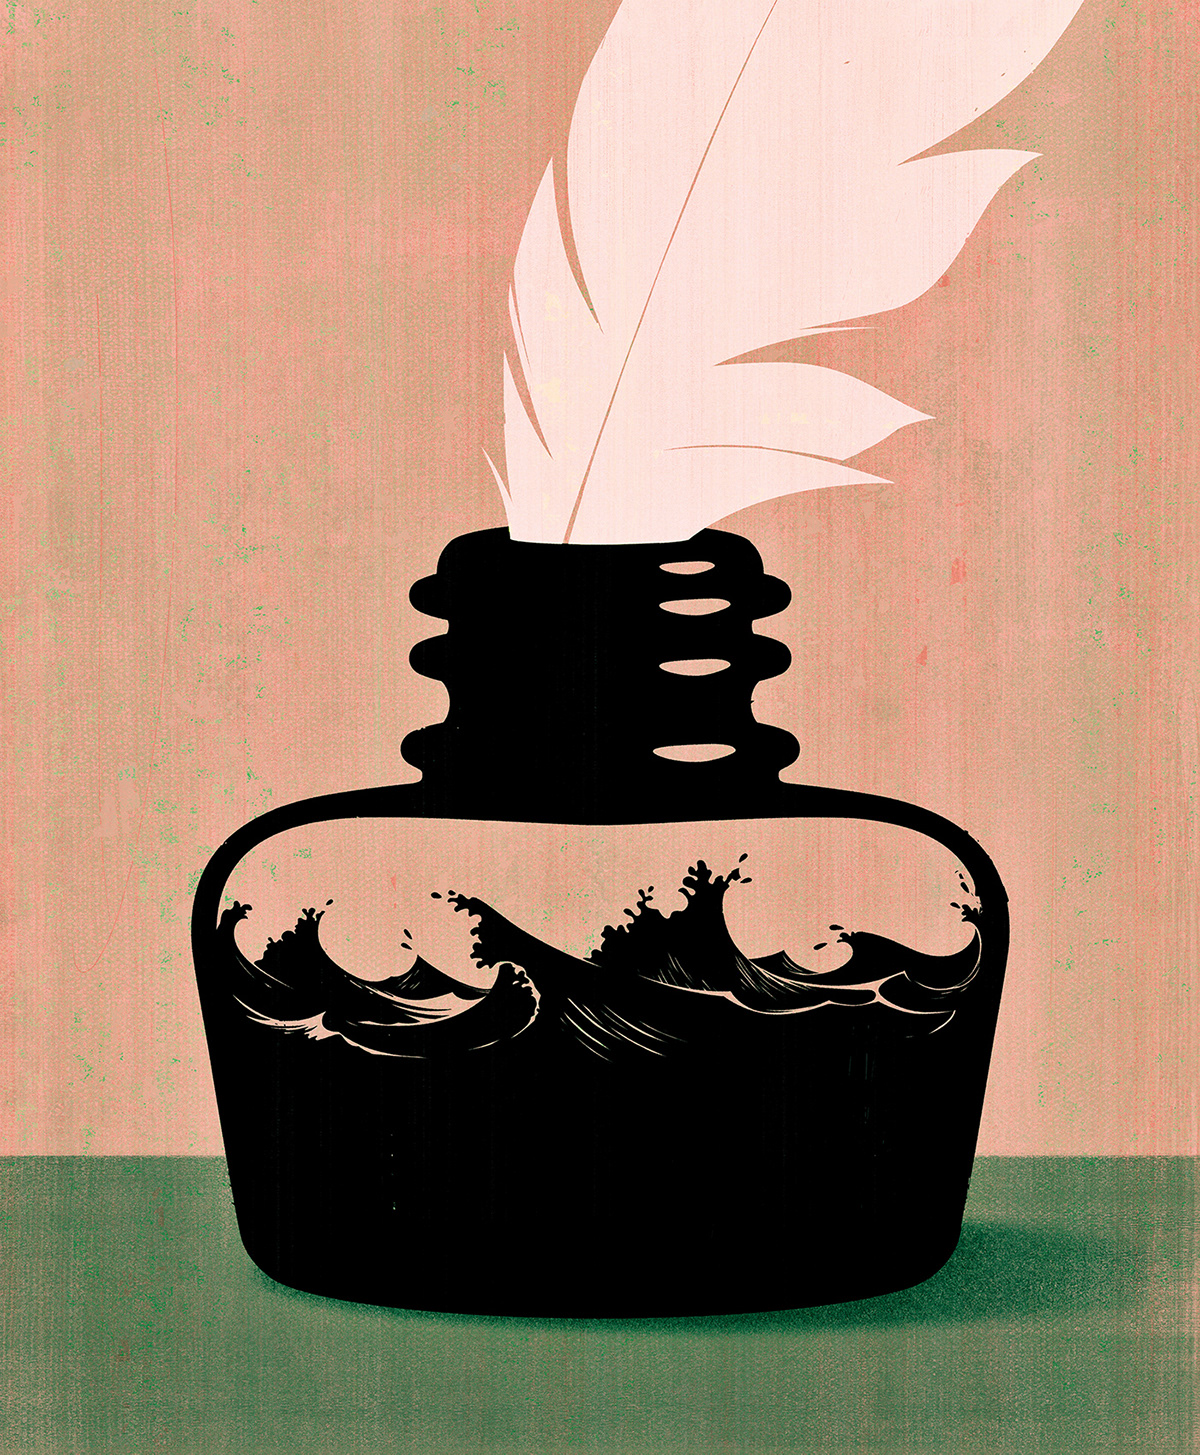 Illustration of a storm of ink in an ink pot